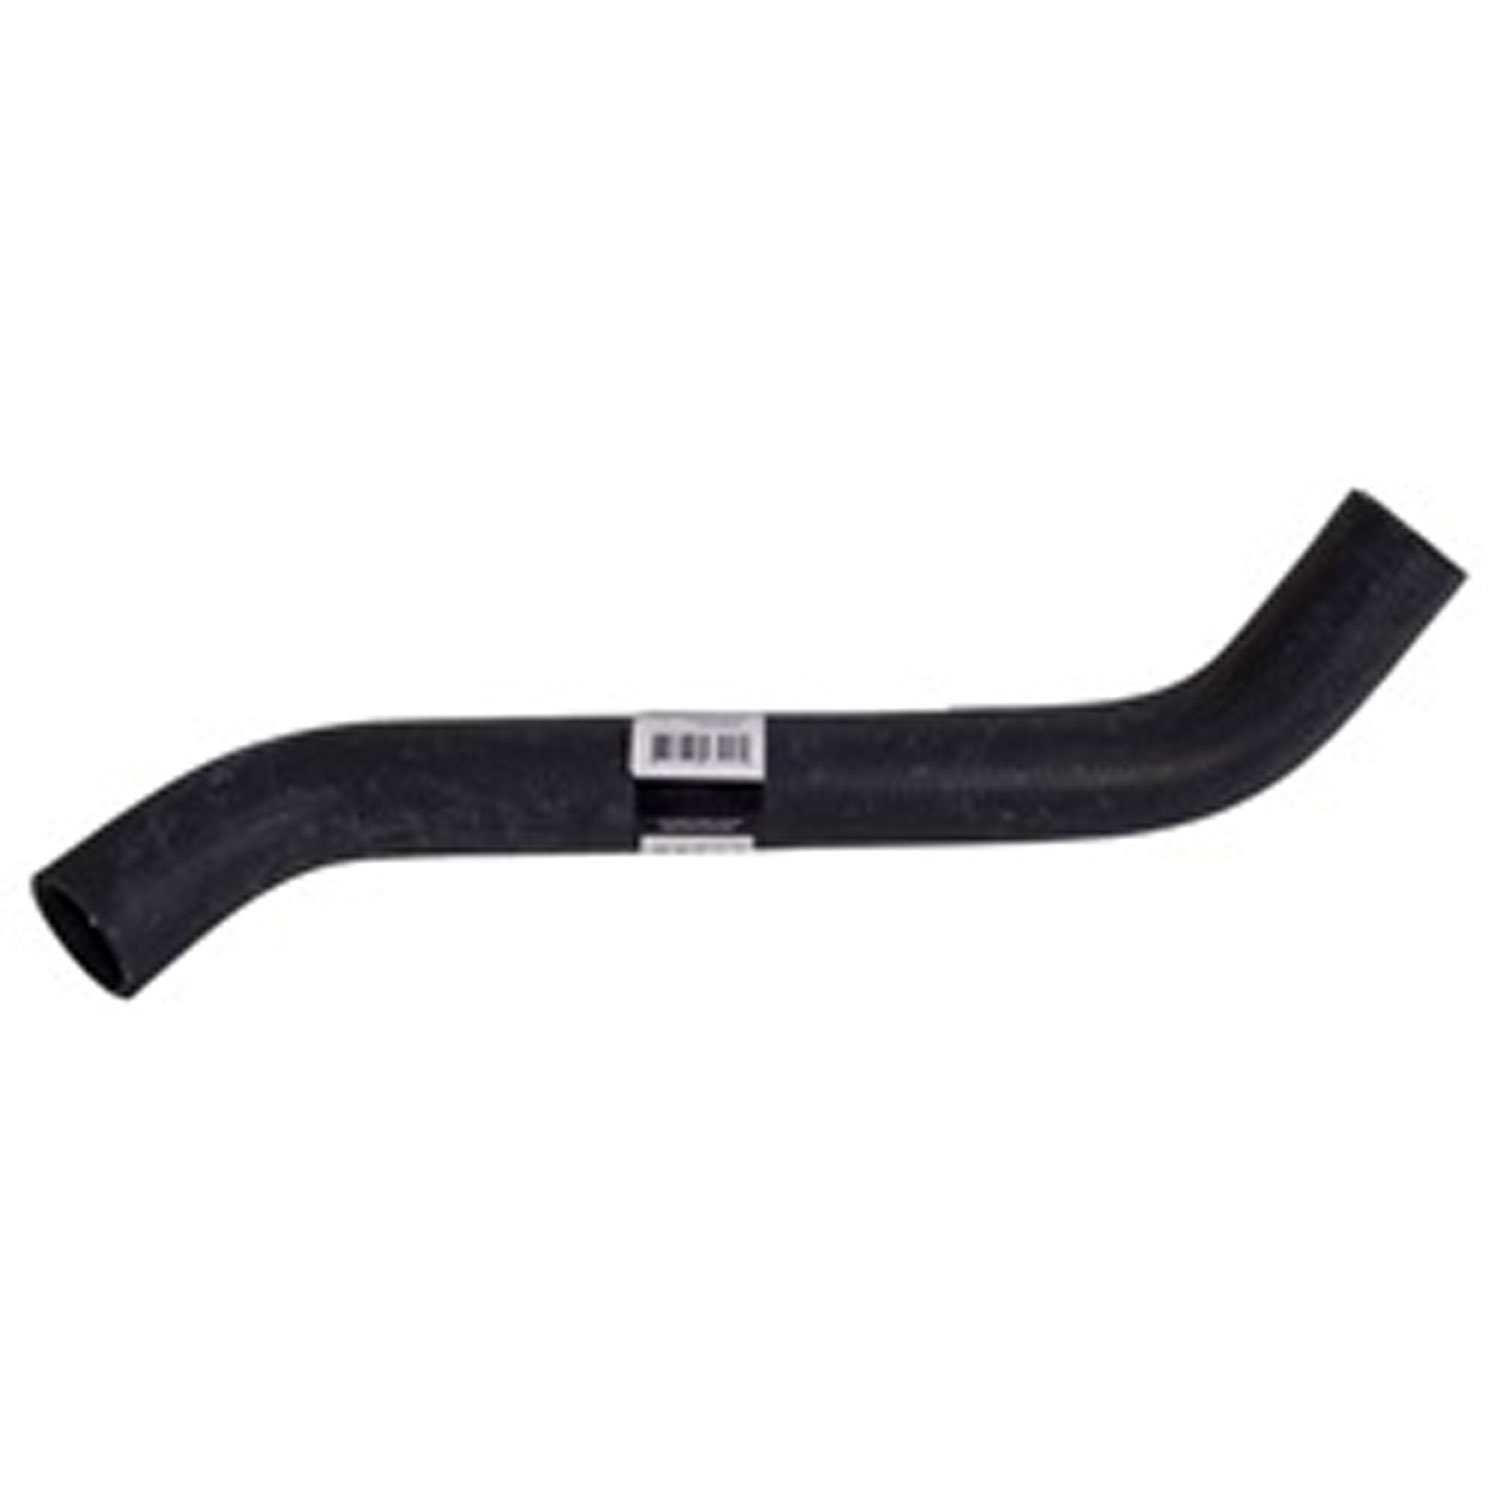 This upper radiator hose from Omix-ADA fits the